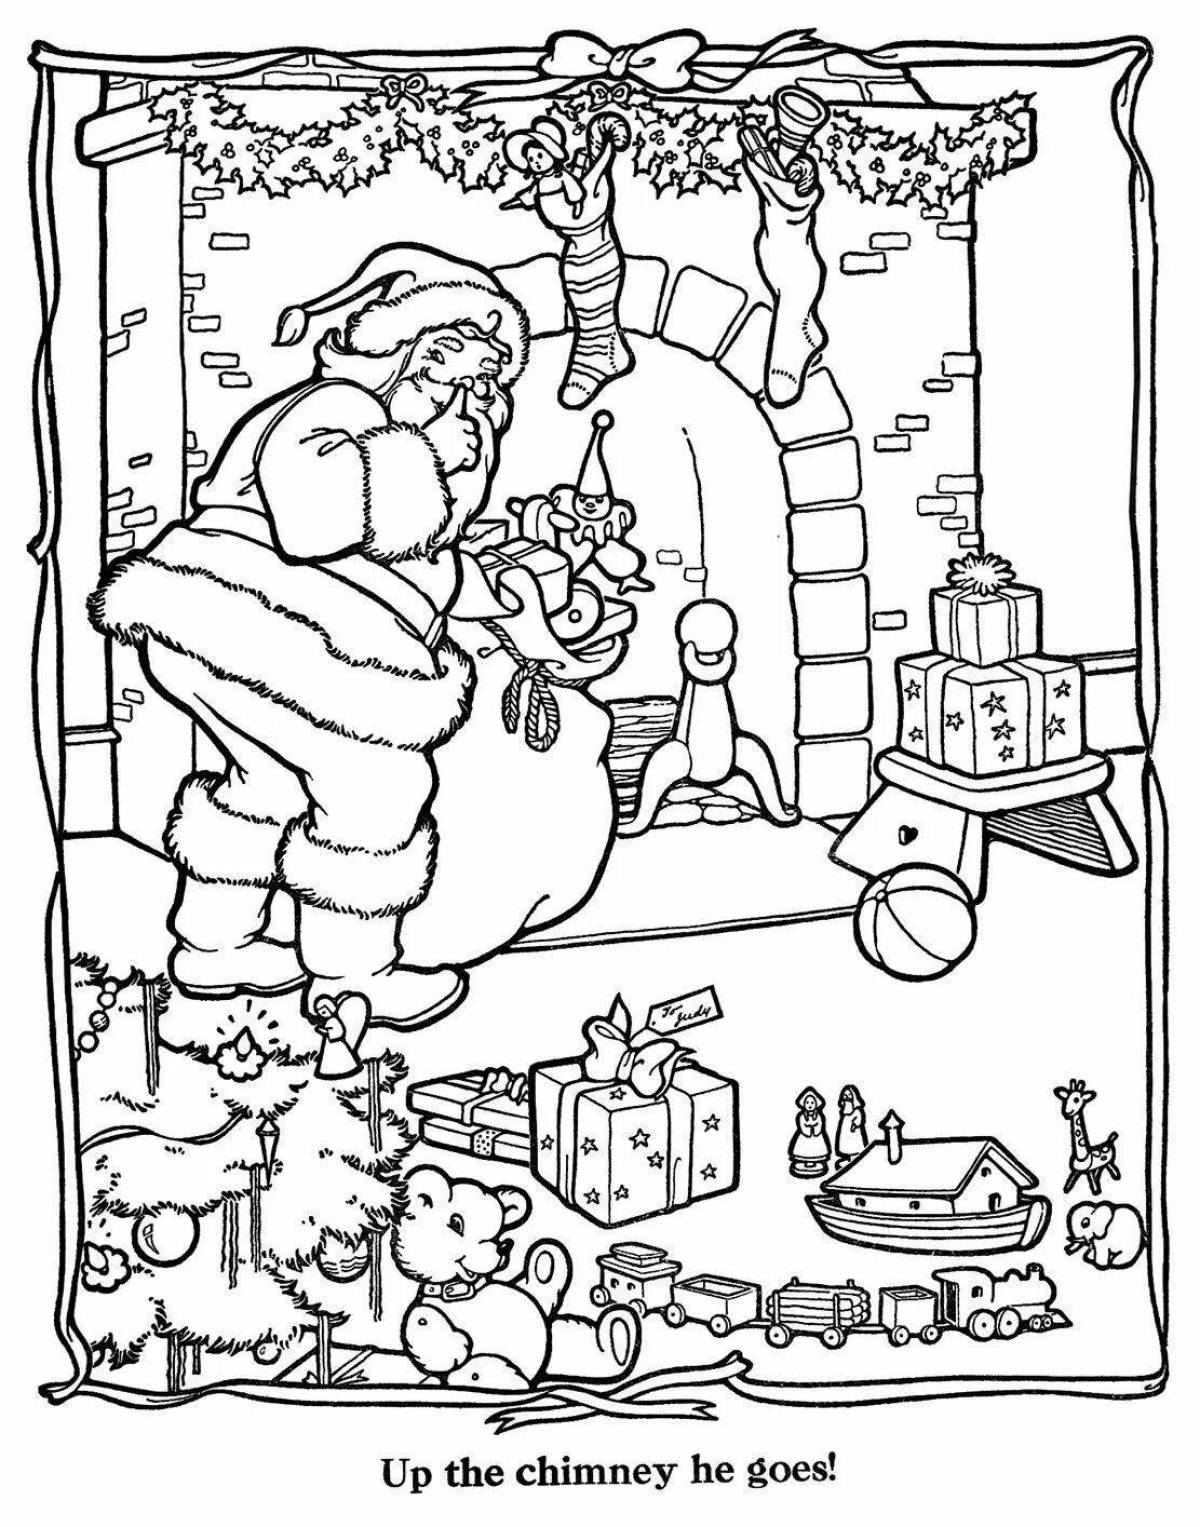 Exquisite Christmas miracle coloring book